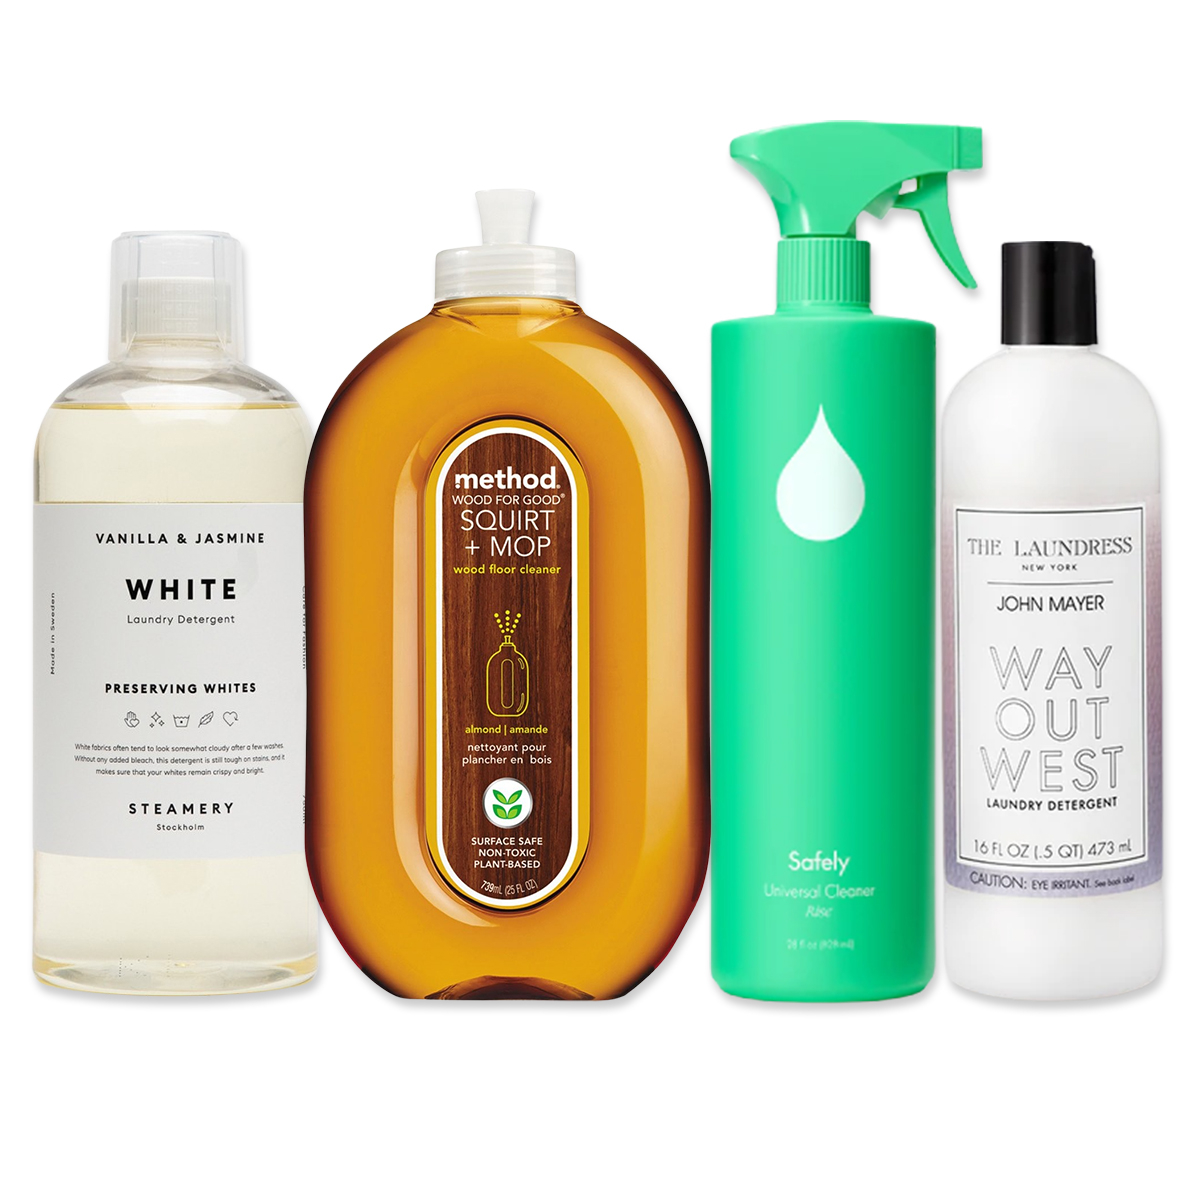 The Best Non-Toxic Cleaning Products